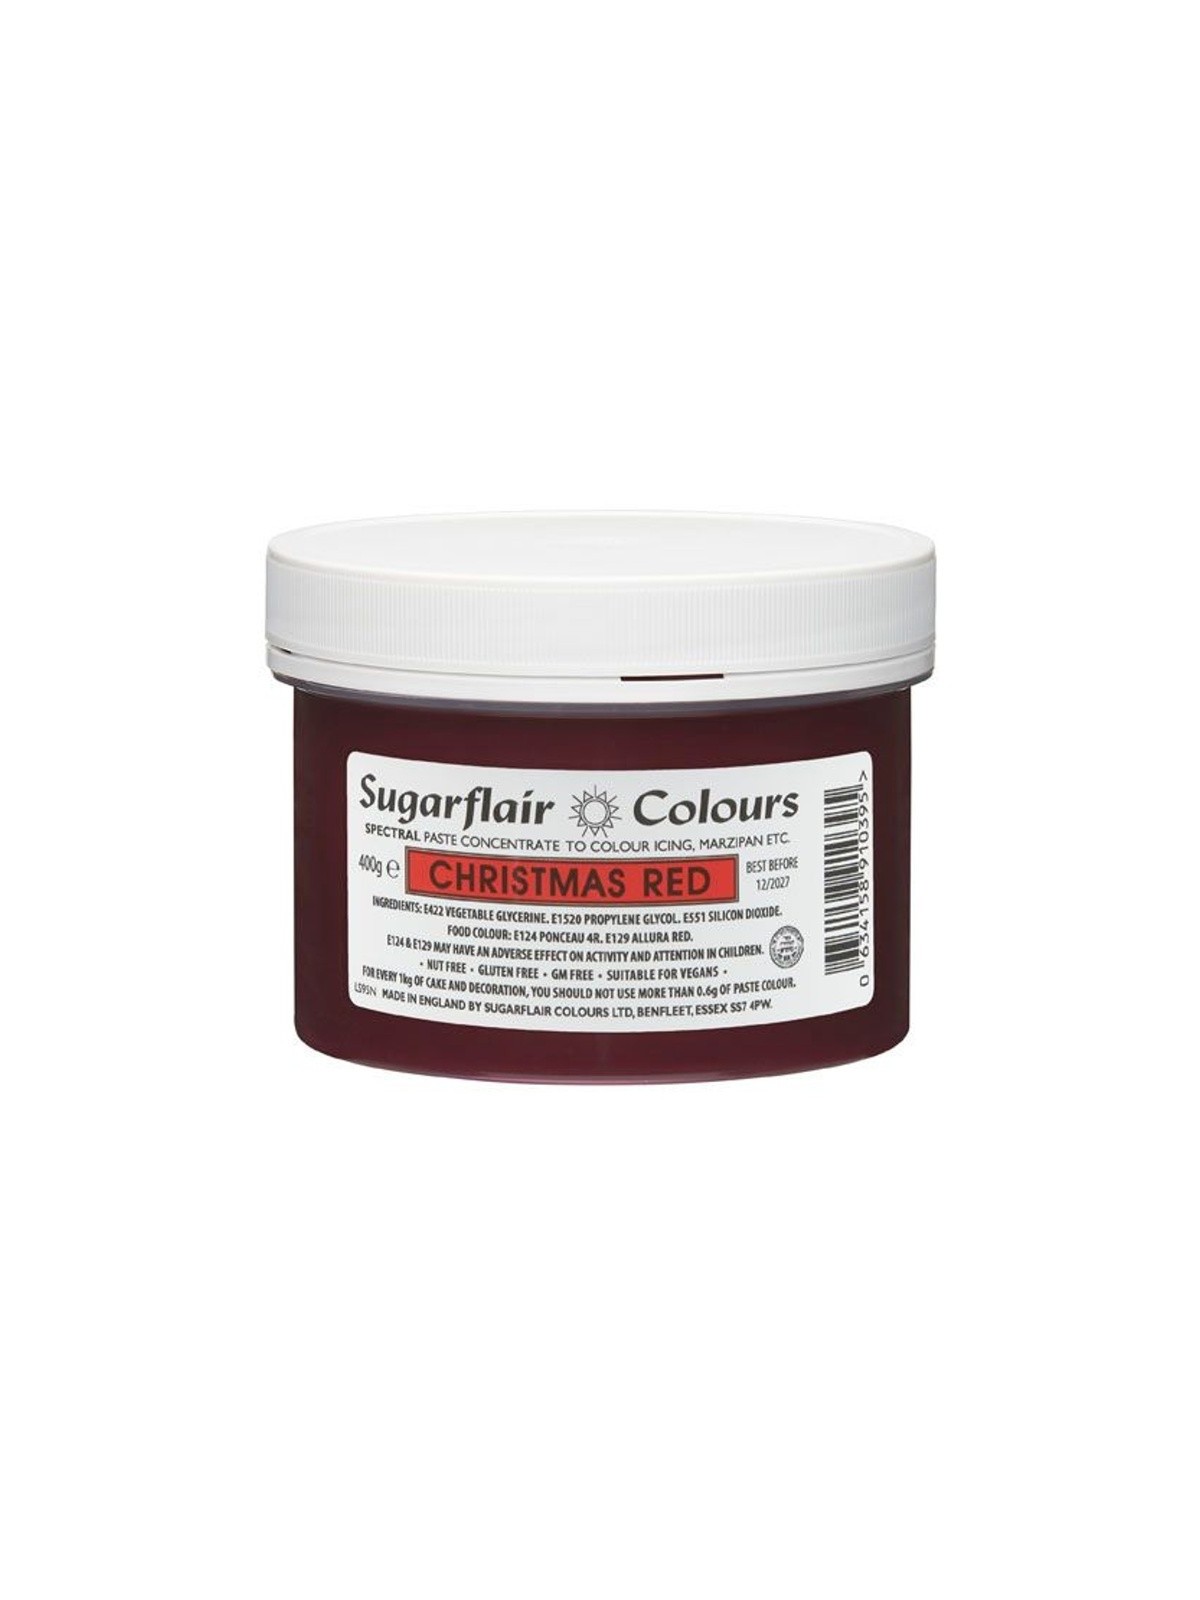 Sugarflair paste colour Christmas Red XXL - Weihnachtsrot - 400g